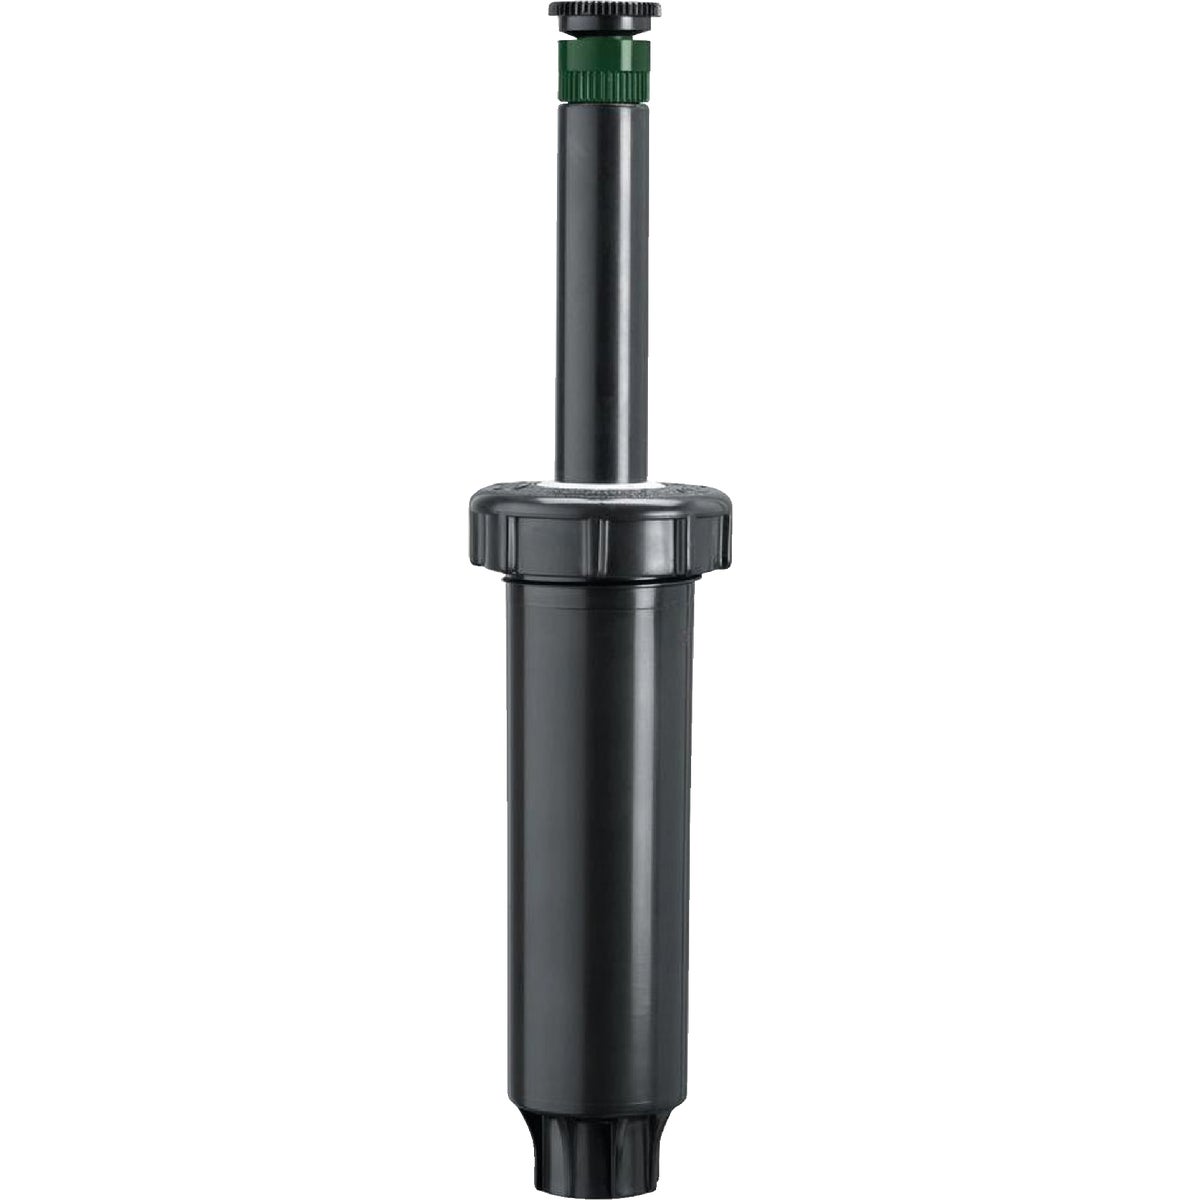 Item 704217, The new Orbit Professional Series with adjustable nozzle, brings rugged 